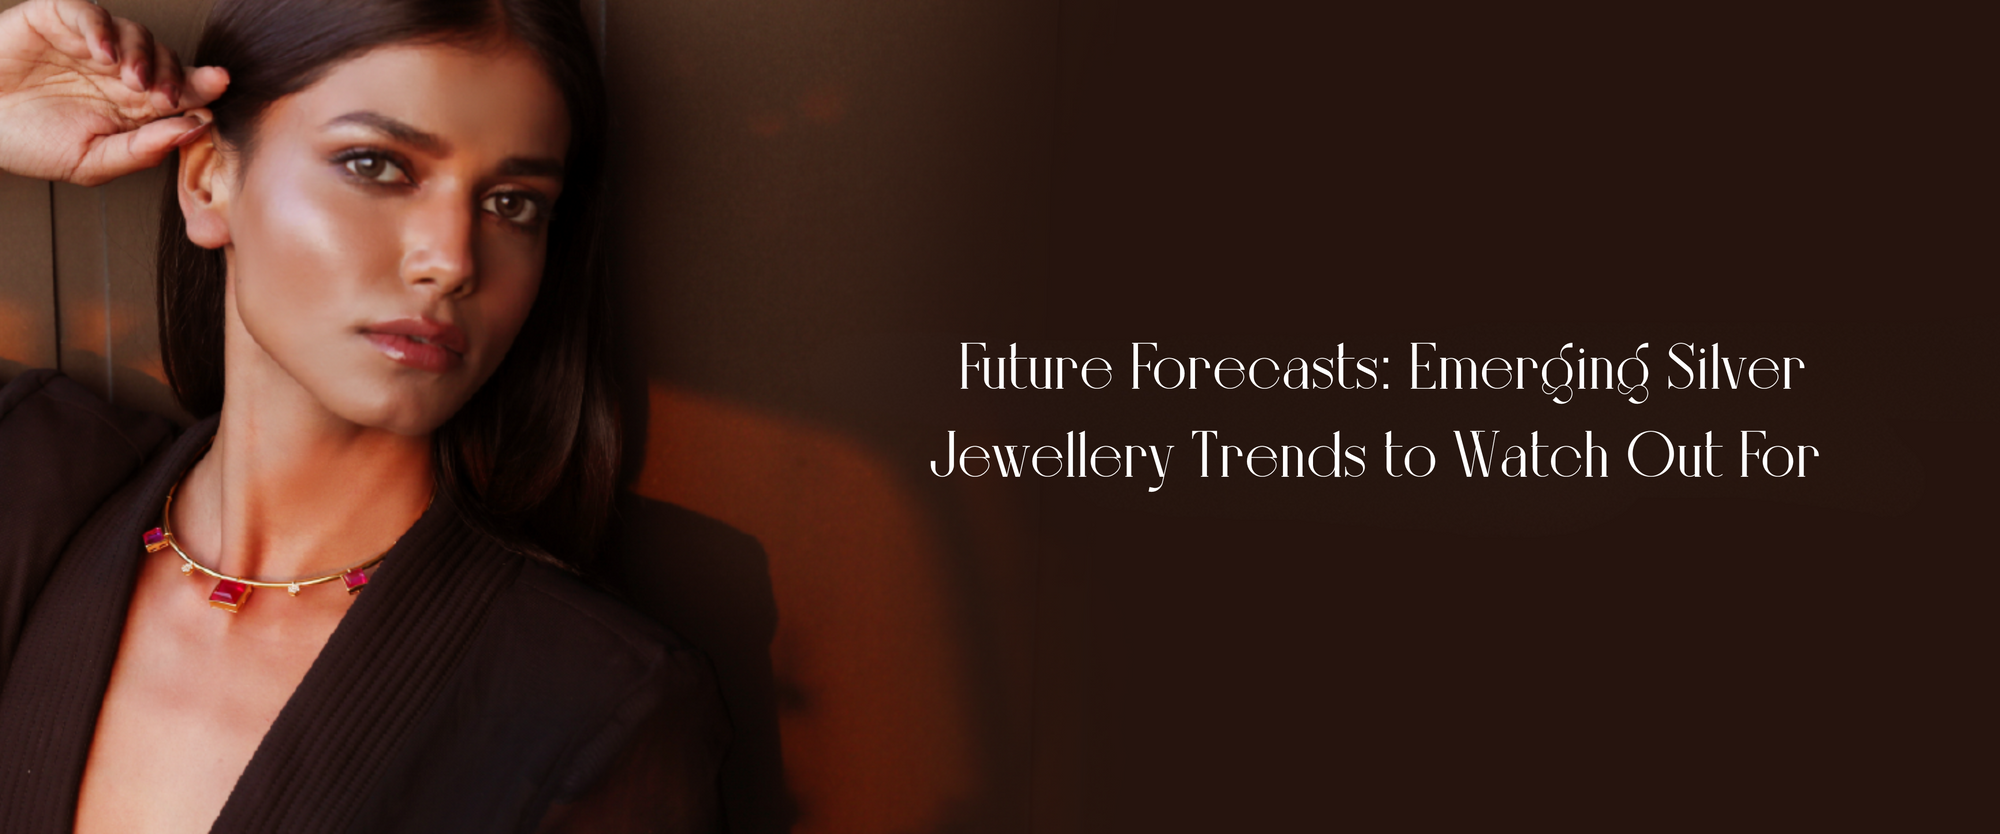 Future Forecasts: Emerging Silver Jewellery Trends to Watch Out For